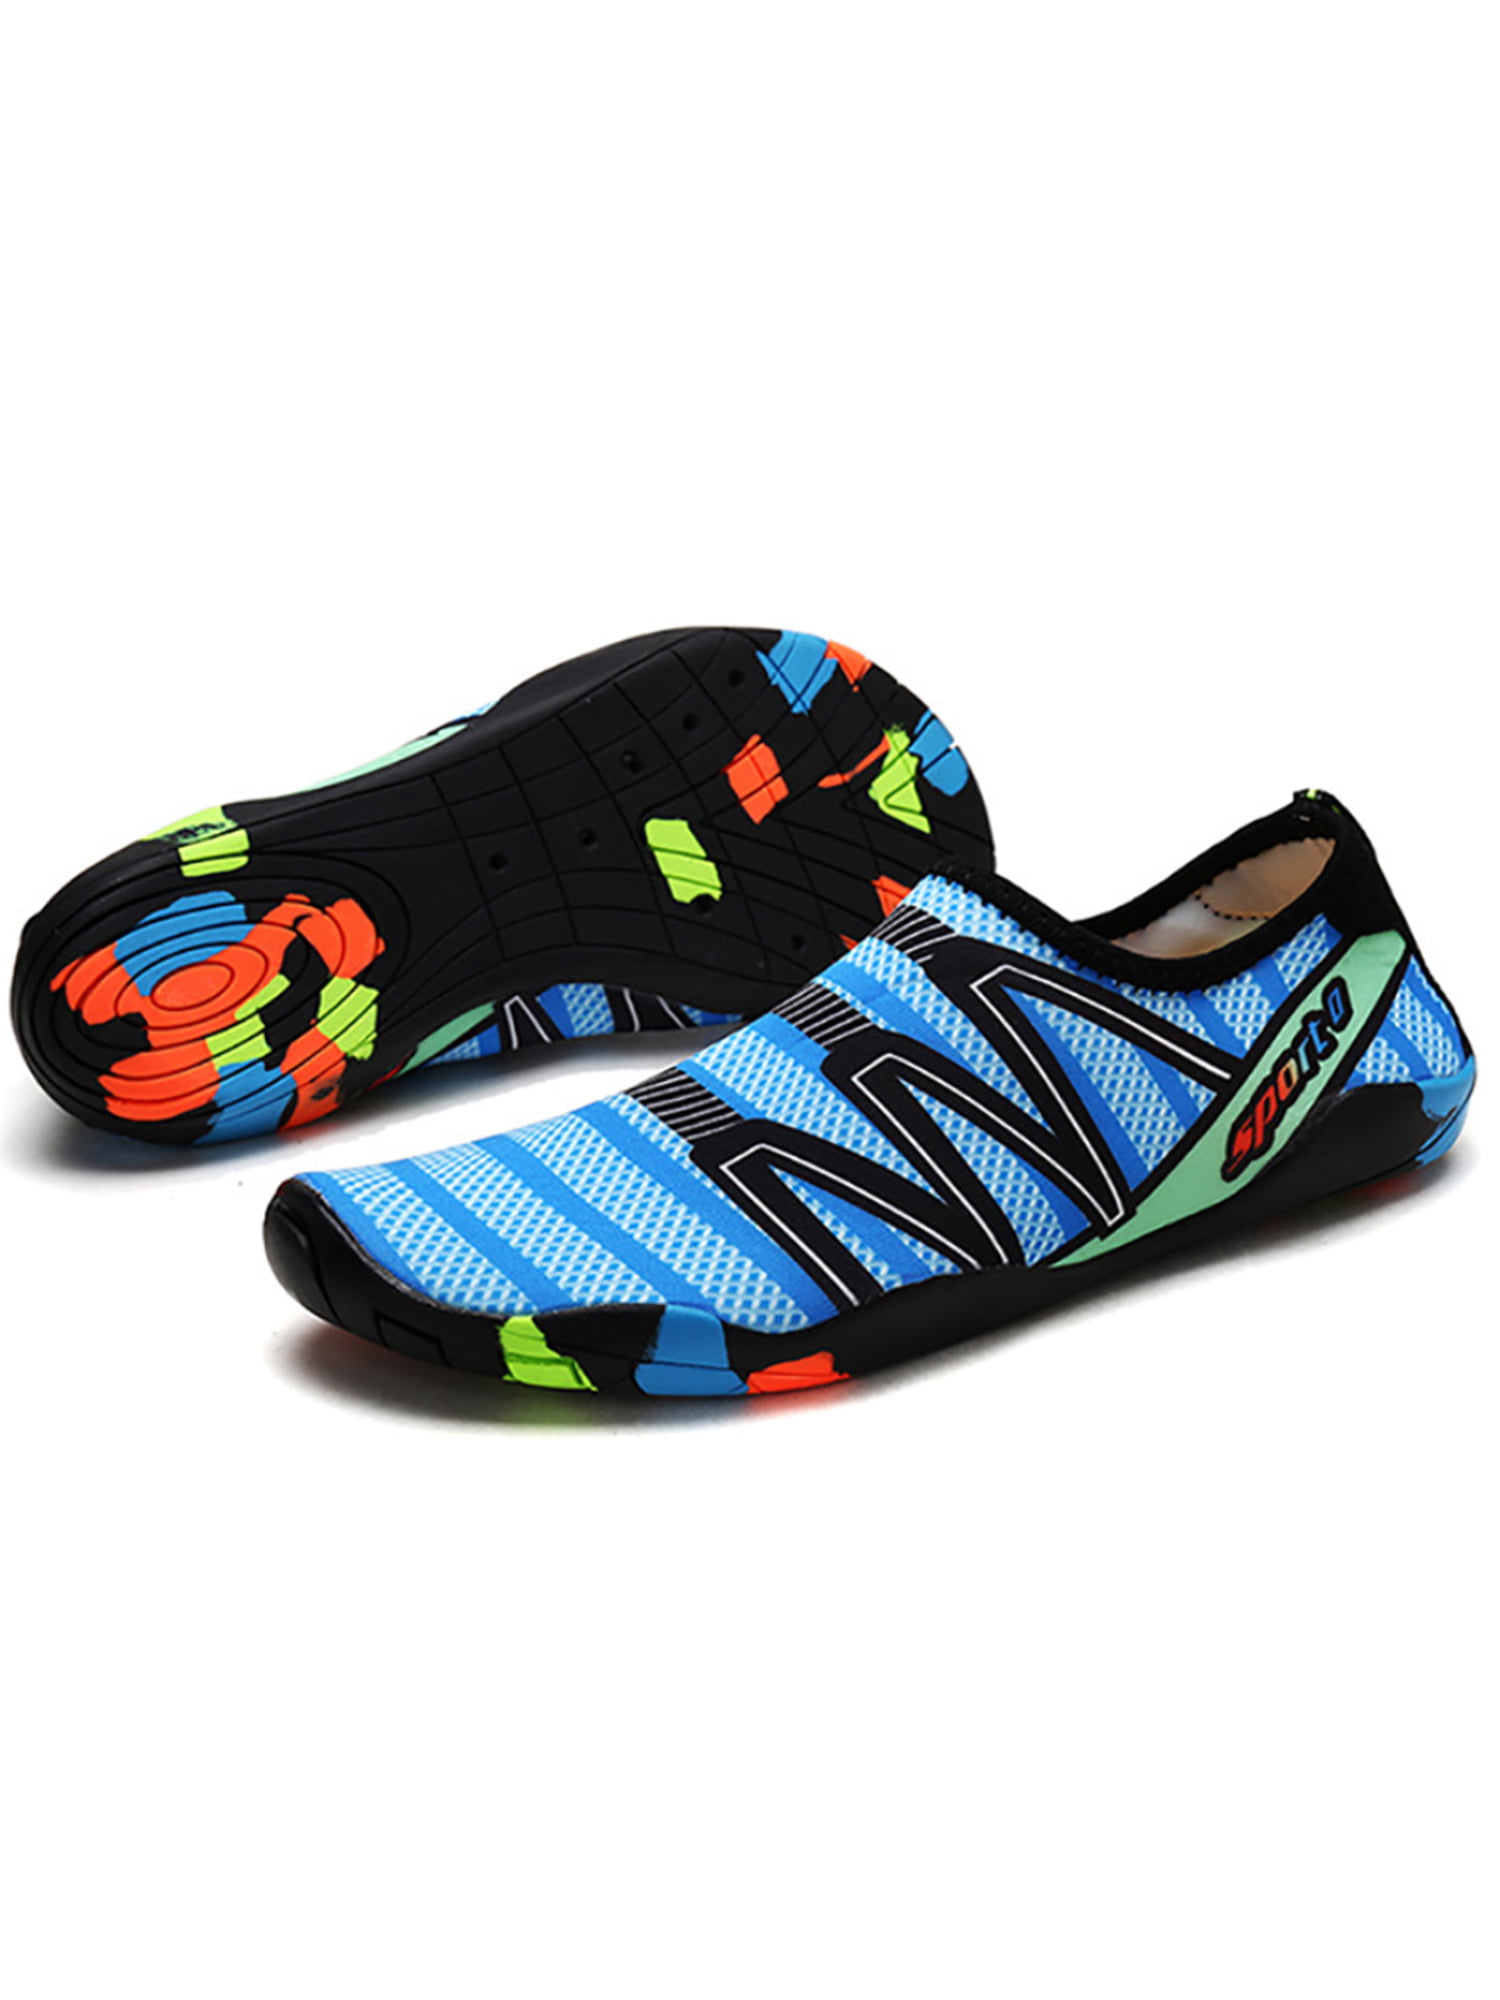 MENS AQUA SHOES BEACH SURF WETSUIT WATER SHOES SPORTS SWIMMING BEACH SOCKS SIZE